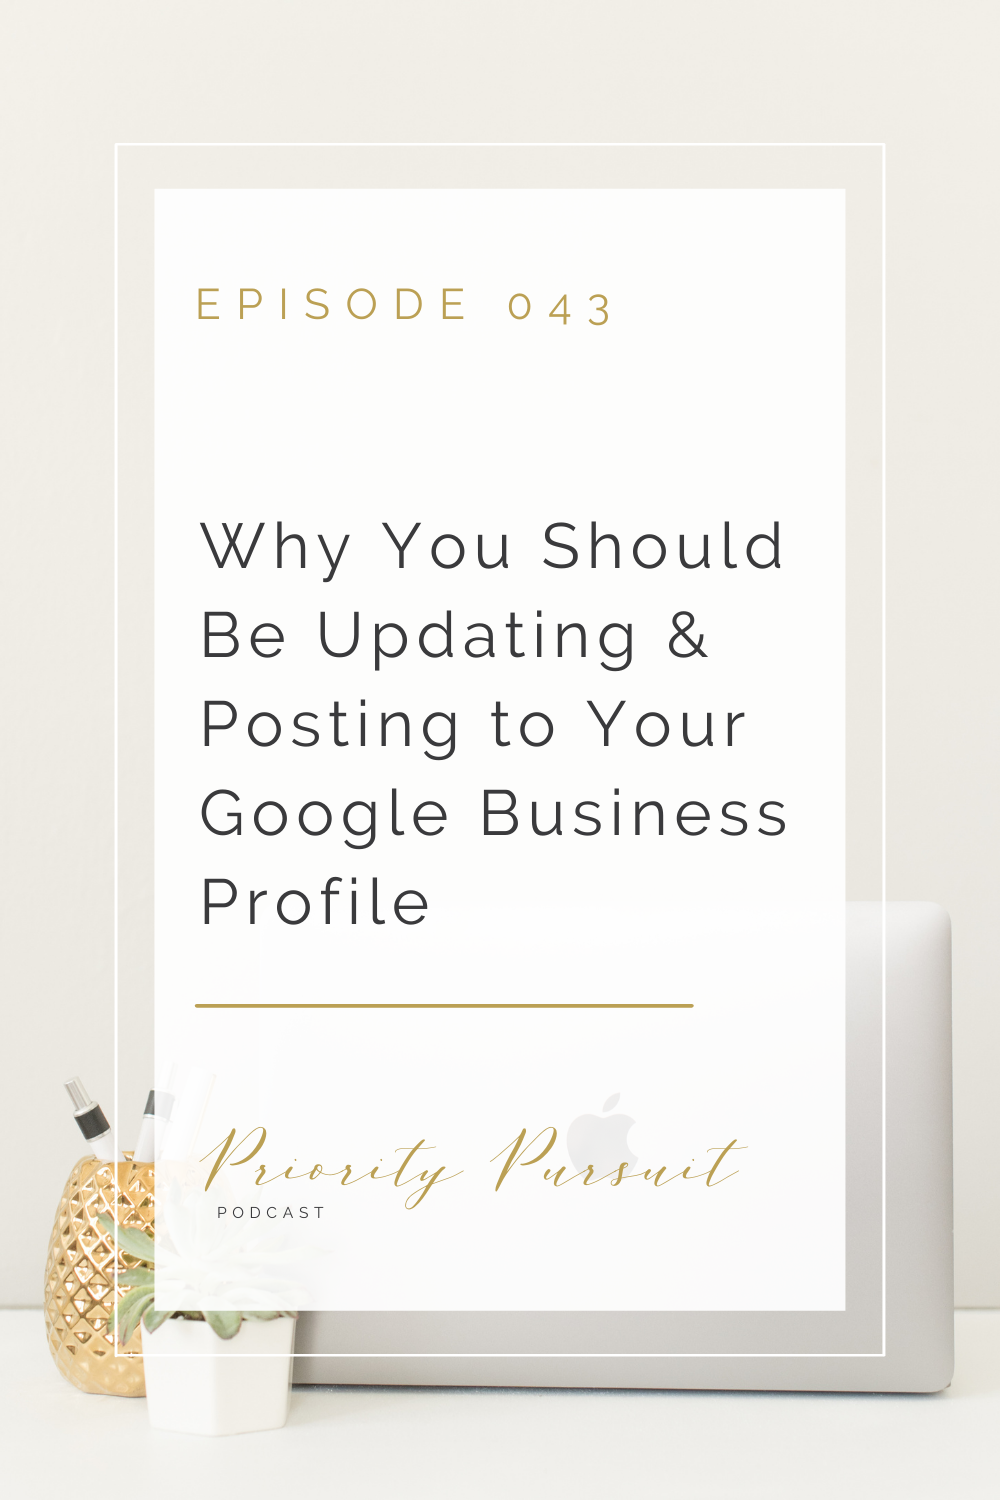 Victoria Rayburn shares why you should be updating and posting to your Google Business Profile regularly in this episode of “Priority Pursuit.”